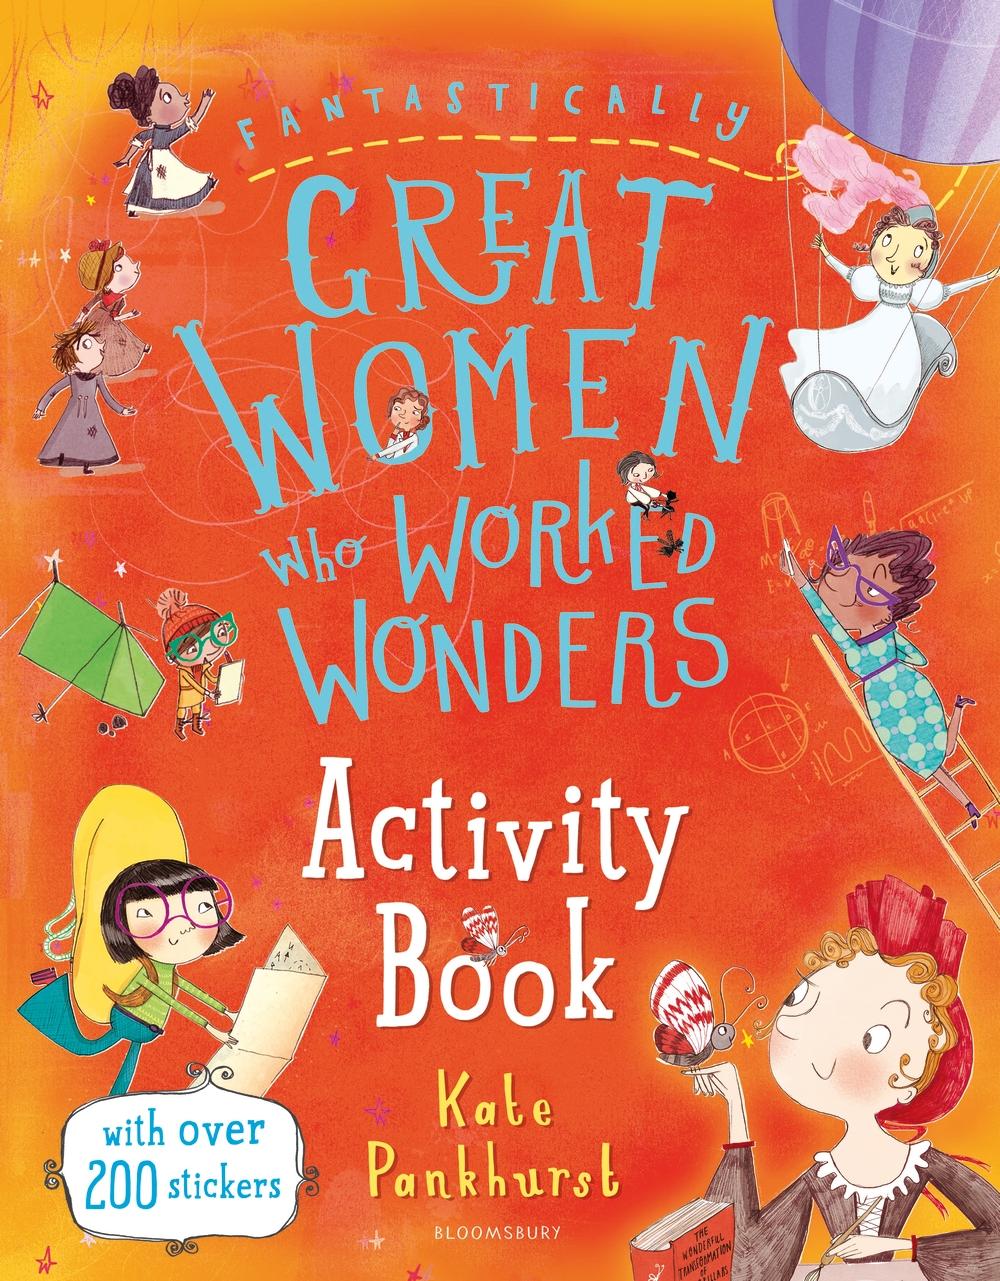 Fantastically Great Women Who Worked Wonders Activity Book -  